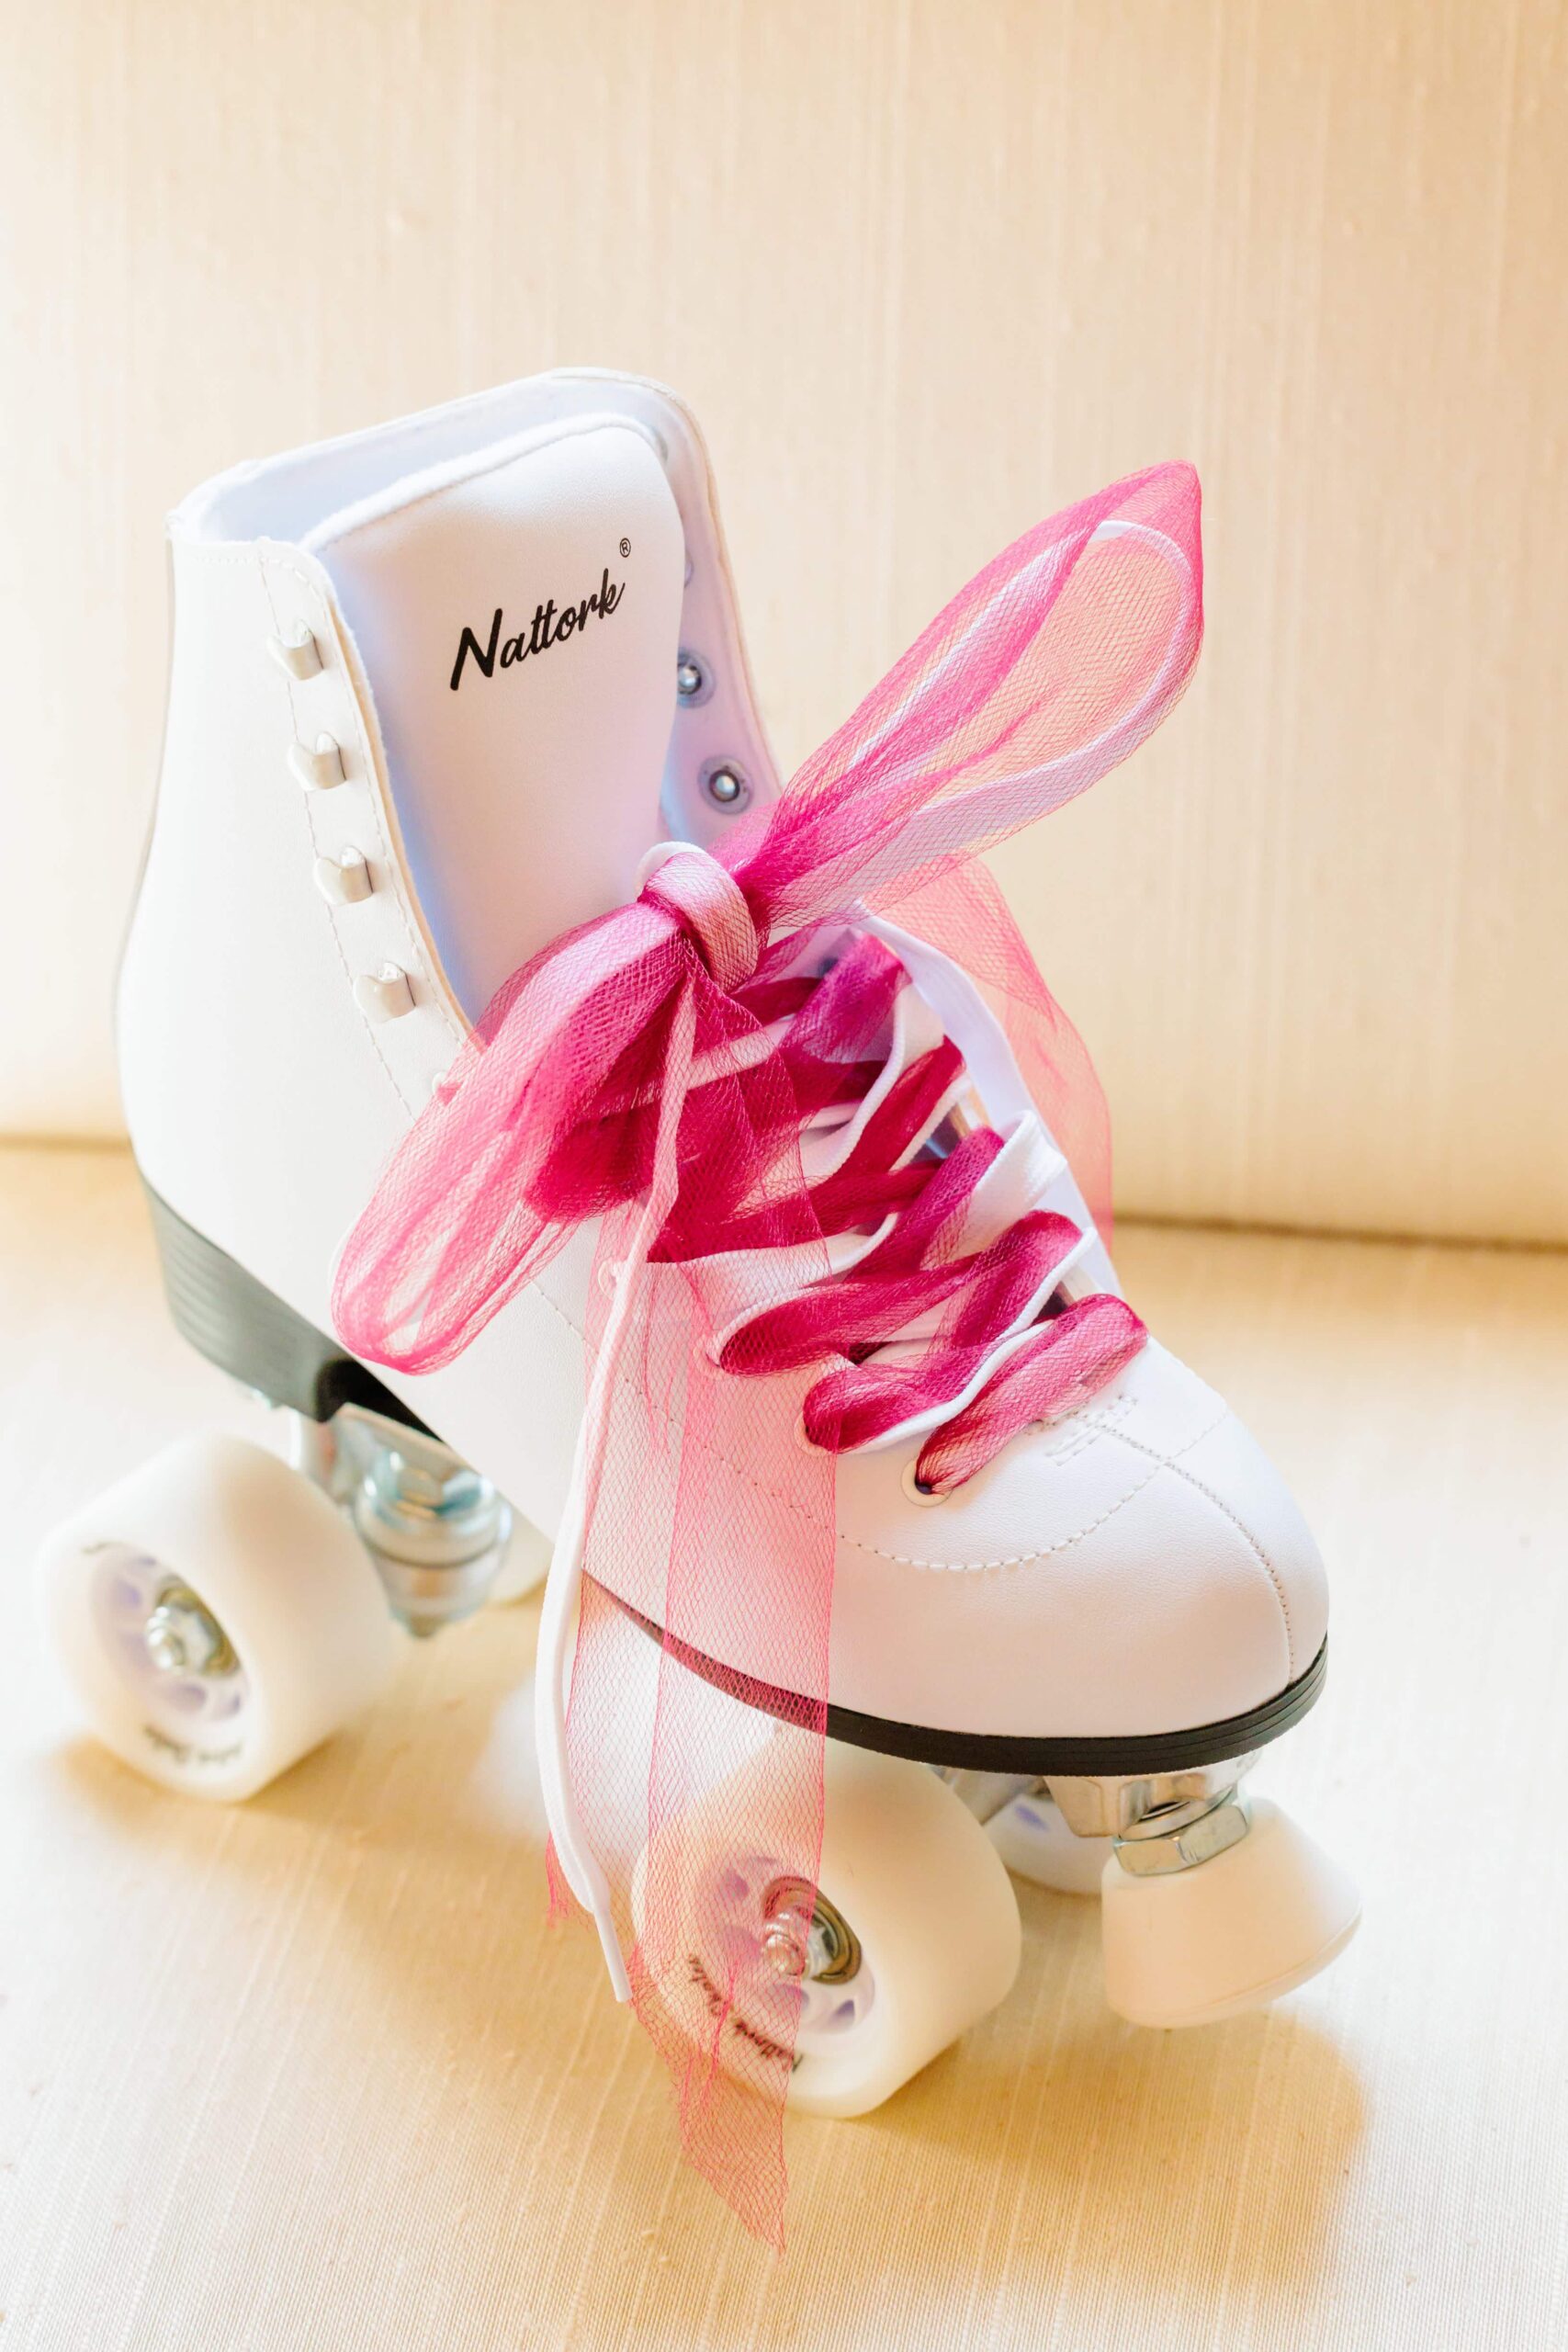 Roller skates with bright pink laces were the perfect compliment to this disco themed wedding.